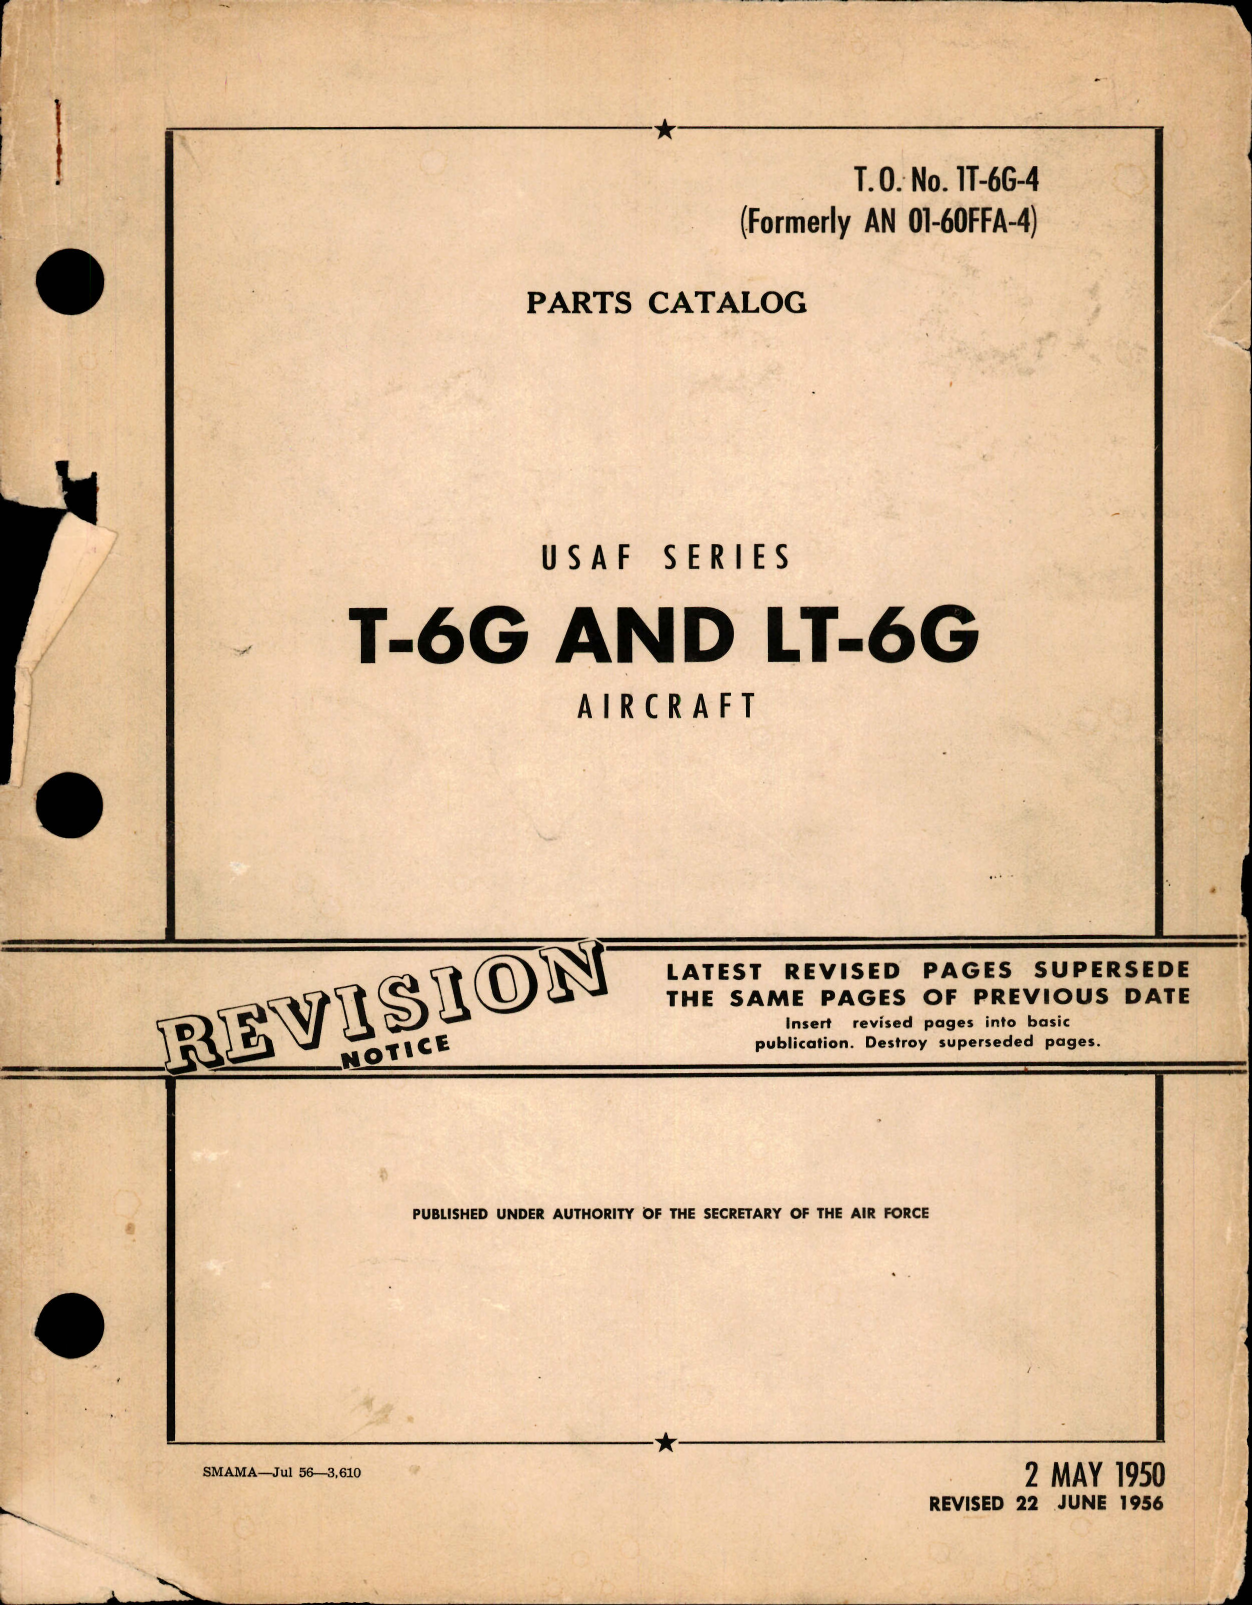 Sample page 1 from AirCorps Library document: Parts Catalog for T-6G and LT-6G